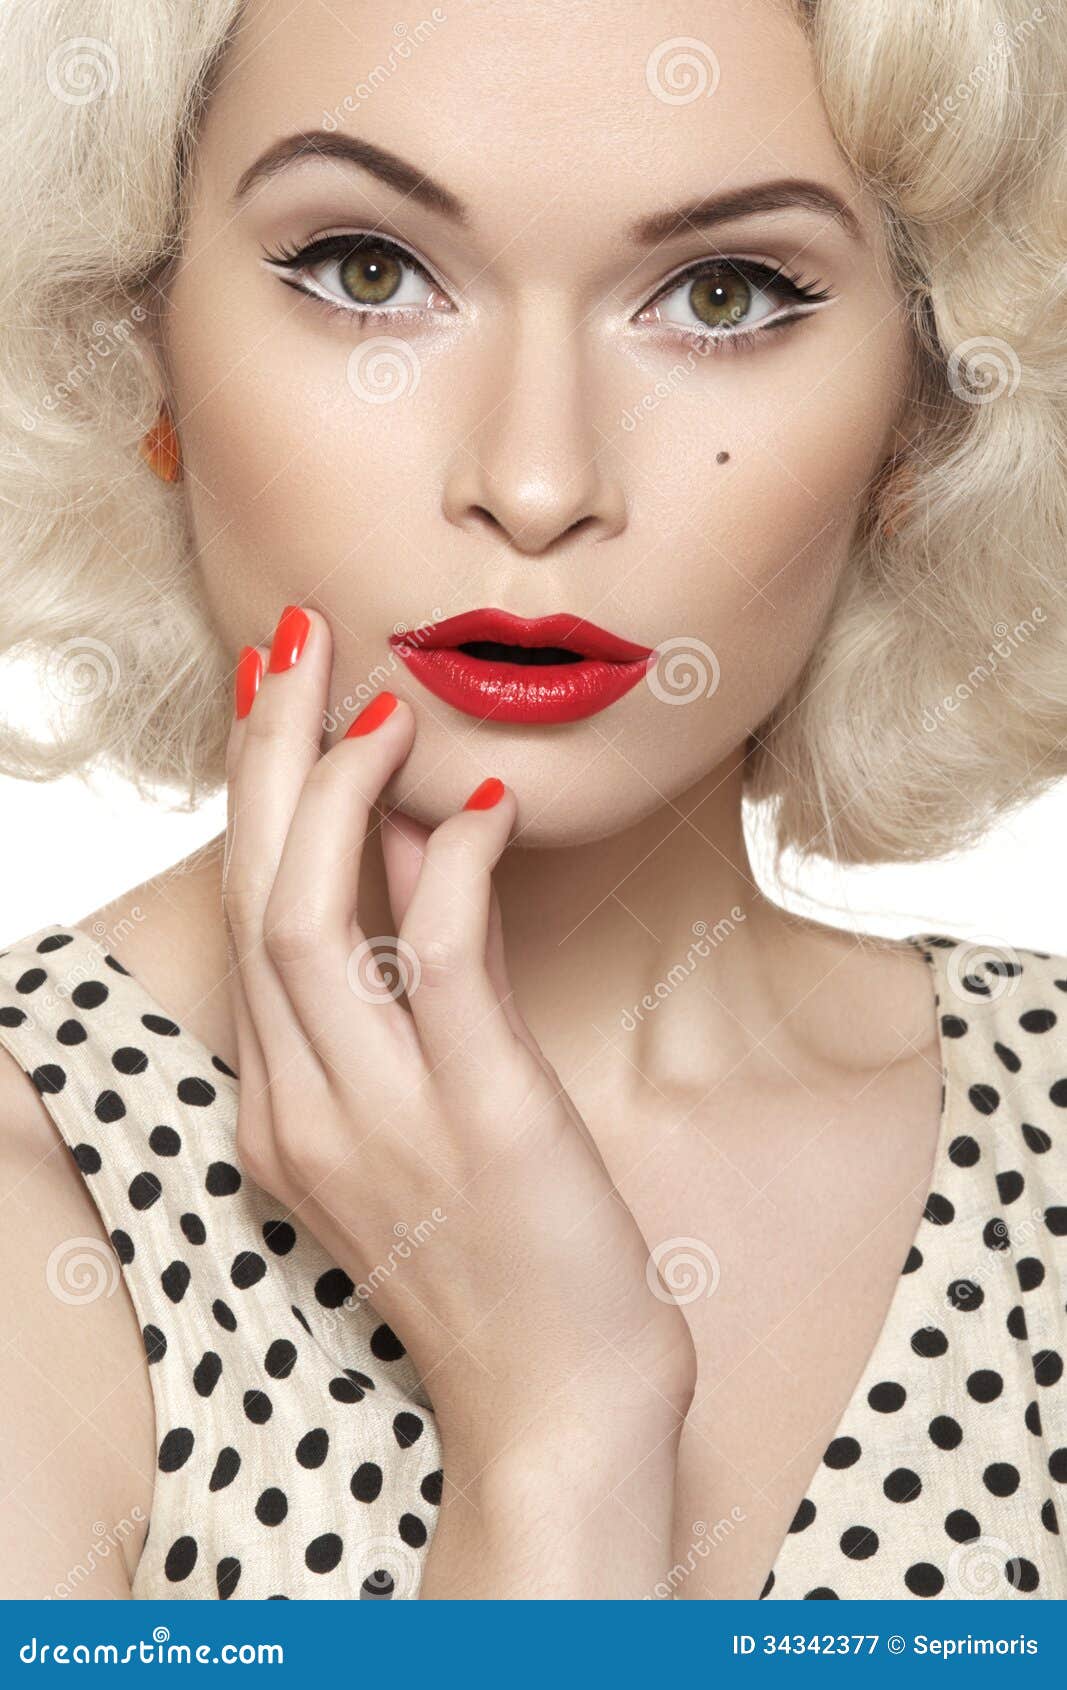 The Red Lip: An American Classic